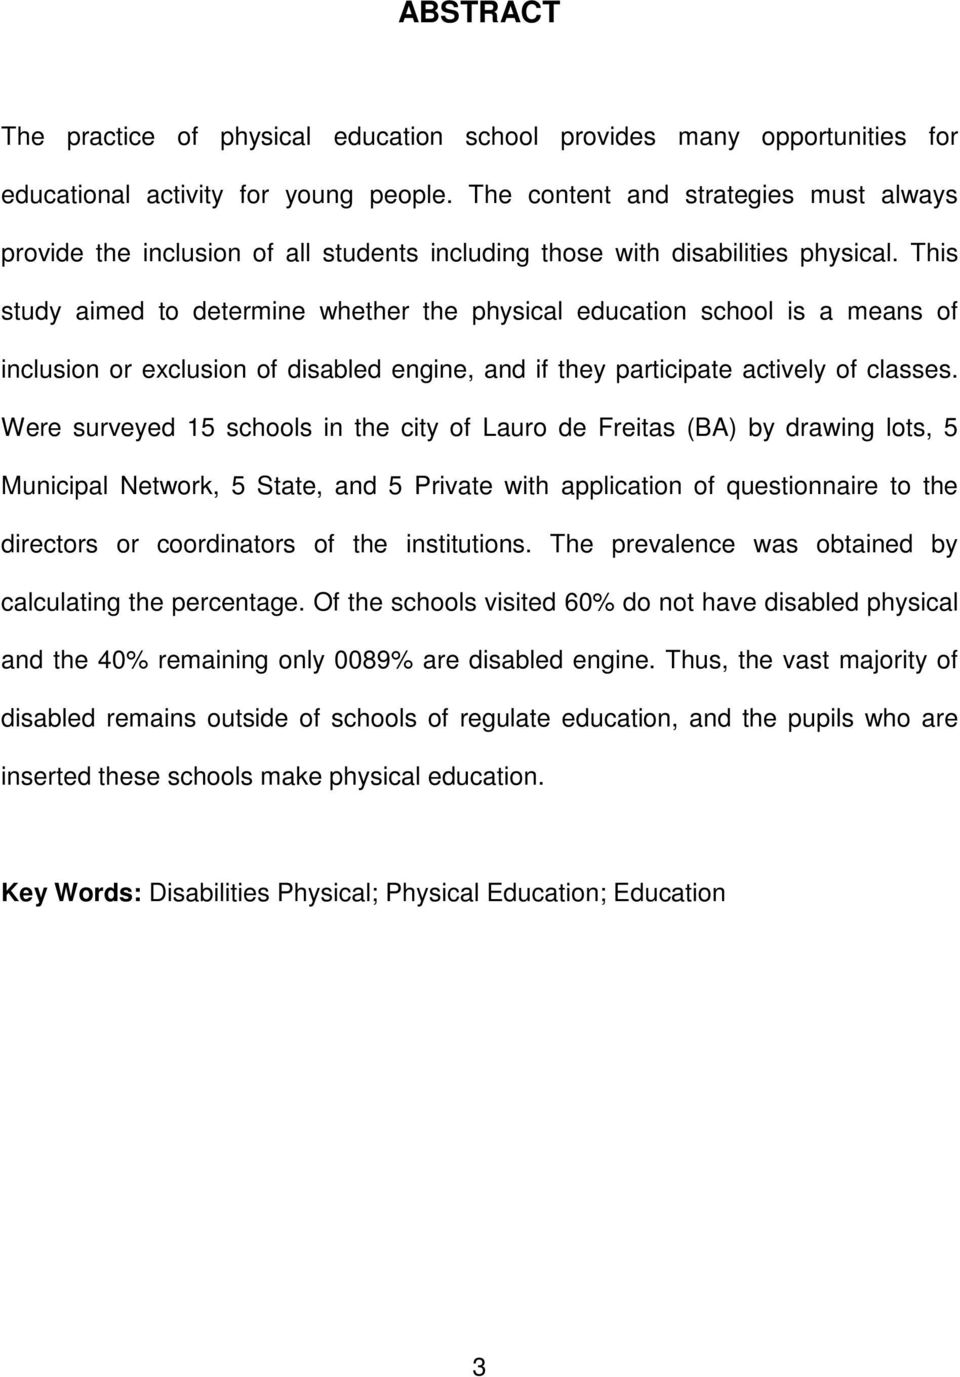 This study aimed to determine whether the physical education school is a means of inclusion or exclusion of disabled engine, and if they participate actively of classes.